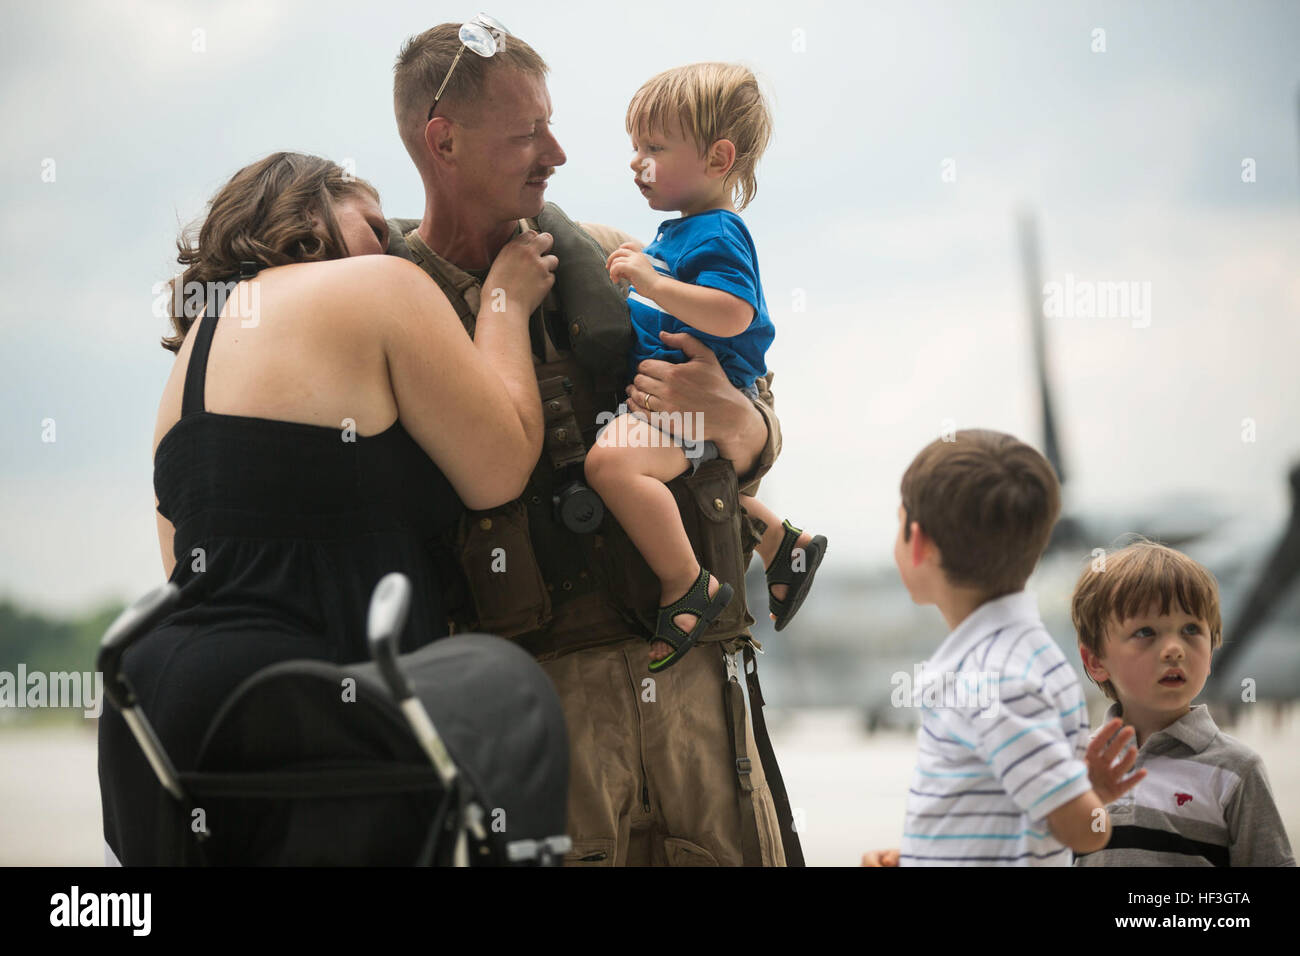 Staff Sgt. Tyler Clabaugh, a CH-53 Super Stallion helicopter mechanic with Marine Medium Tiltrotor Squadron 365 (Reinforced), 24th Marine Expeditionary Unit, reunites with his family during the Aviation Combat Element’s homecoming at Marine Corps Air Station New River, N.C. July 16, 2015. Marines and Sailors of the 24th MEU were embarked on the ships of the Iwo Jima Amphibious Ready Group and supported operations in the U.S. 5th and 6th Fleet area of operations. They also took part in numerous theater security cooperation exercises and training with allied partners such as Djibouti, Italy, Oma Stock Photo